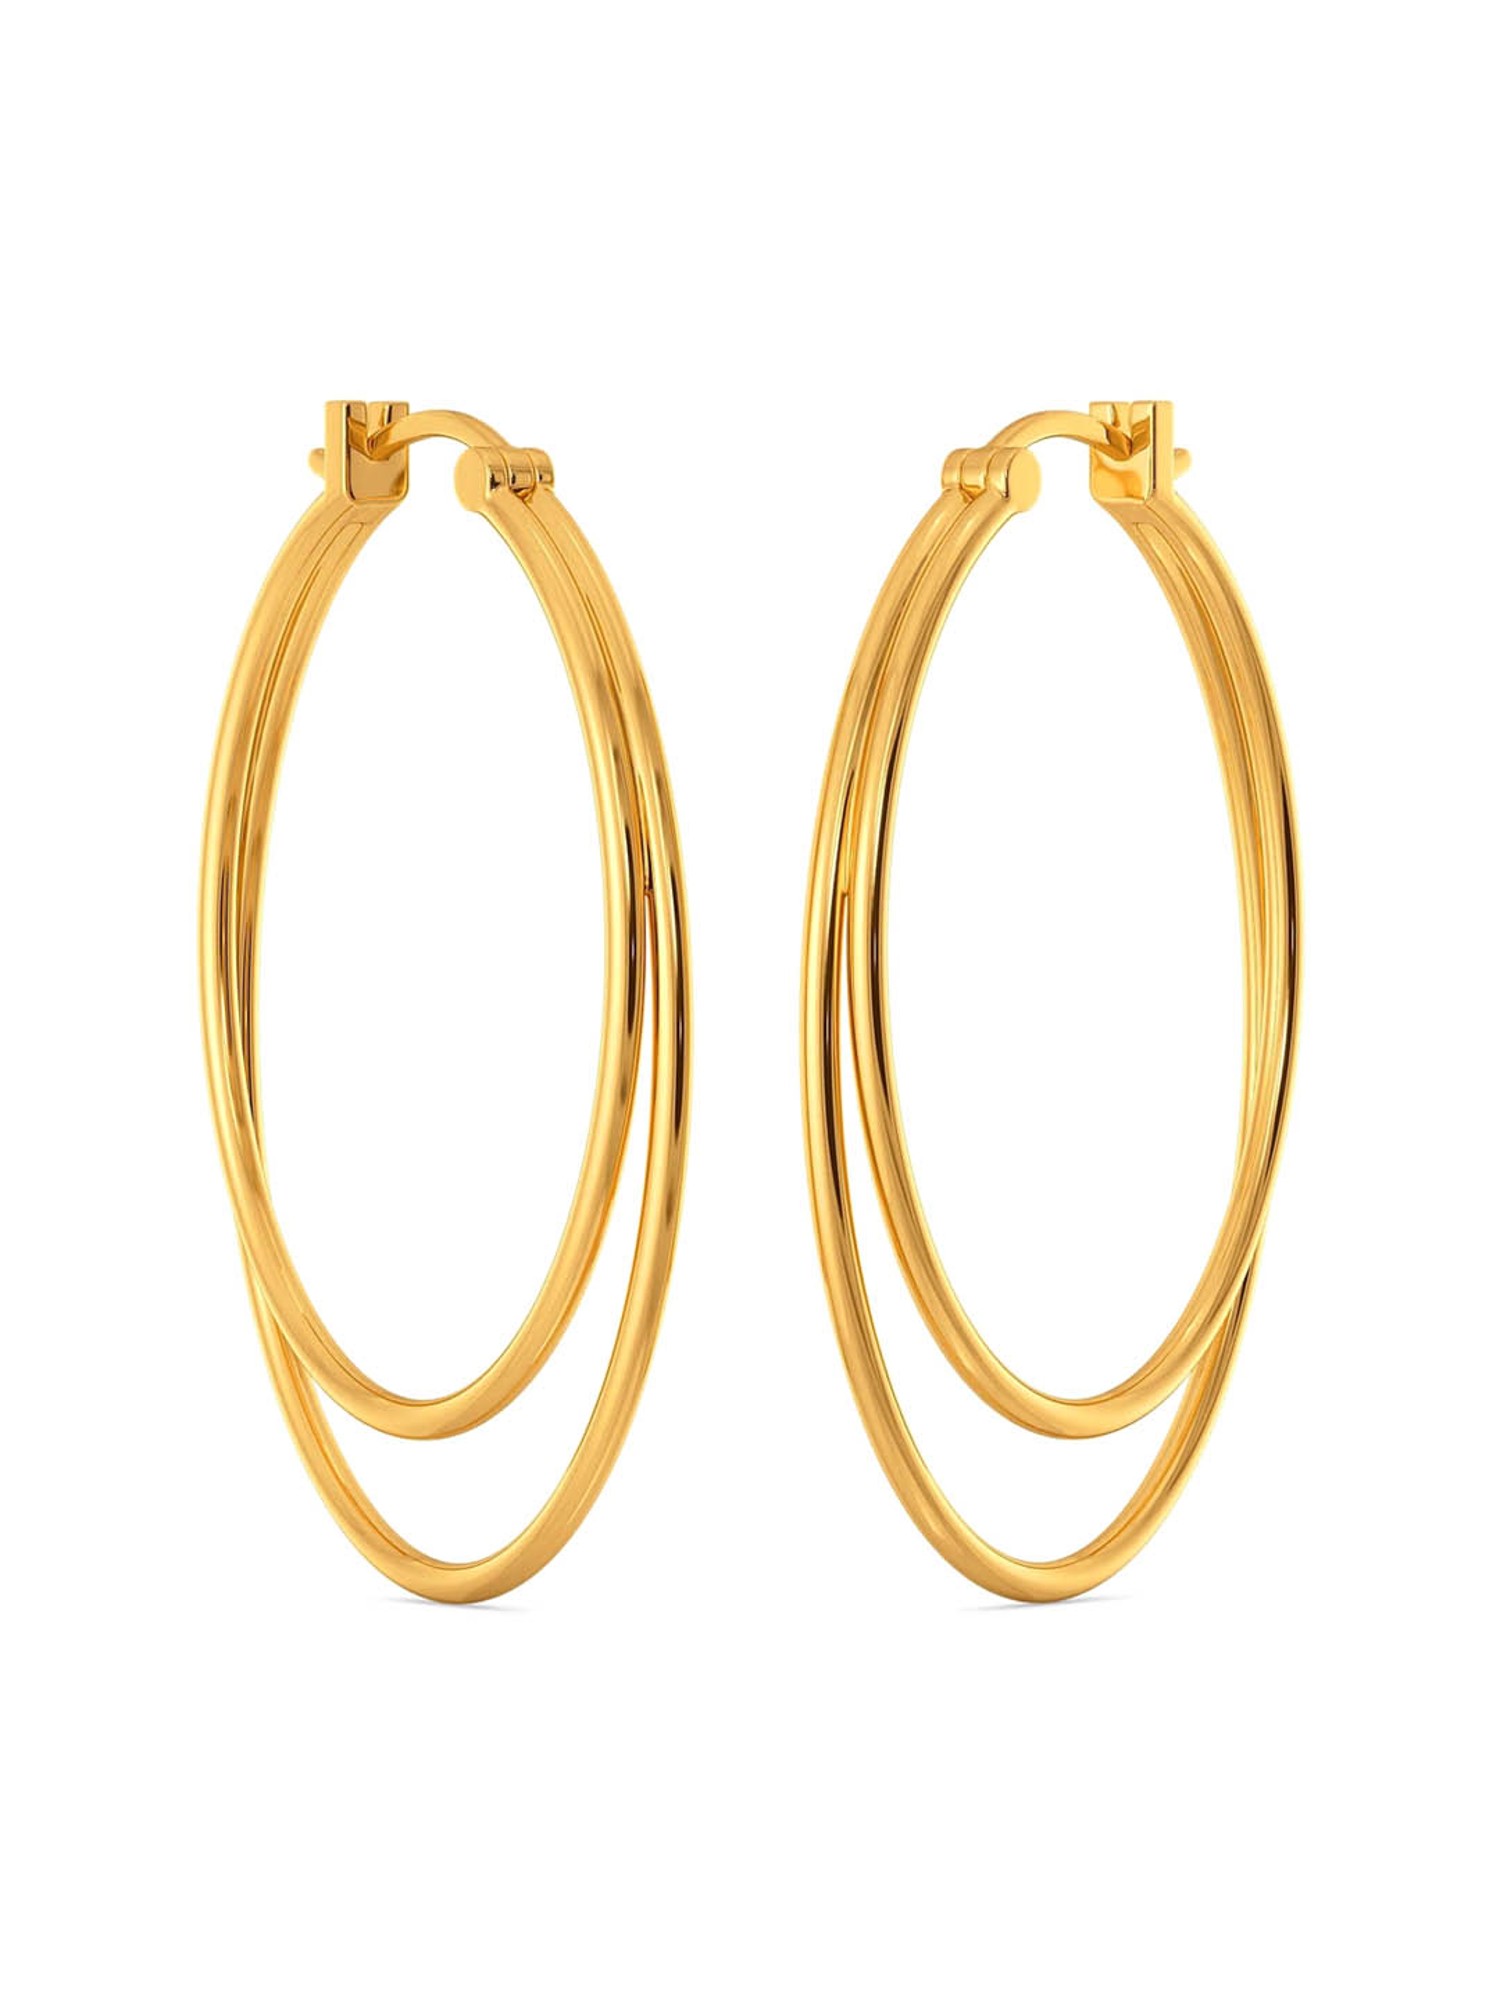 Aggregate more than 76 18k gold earrings